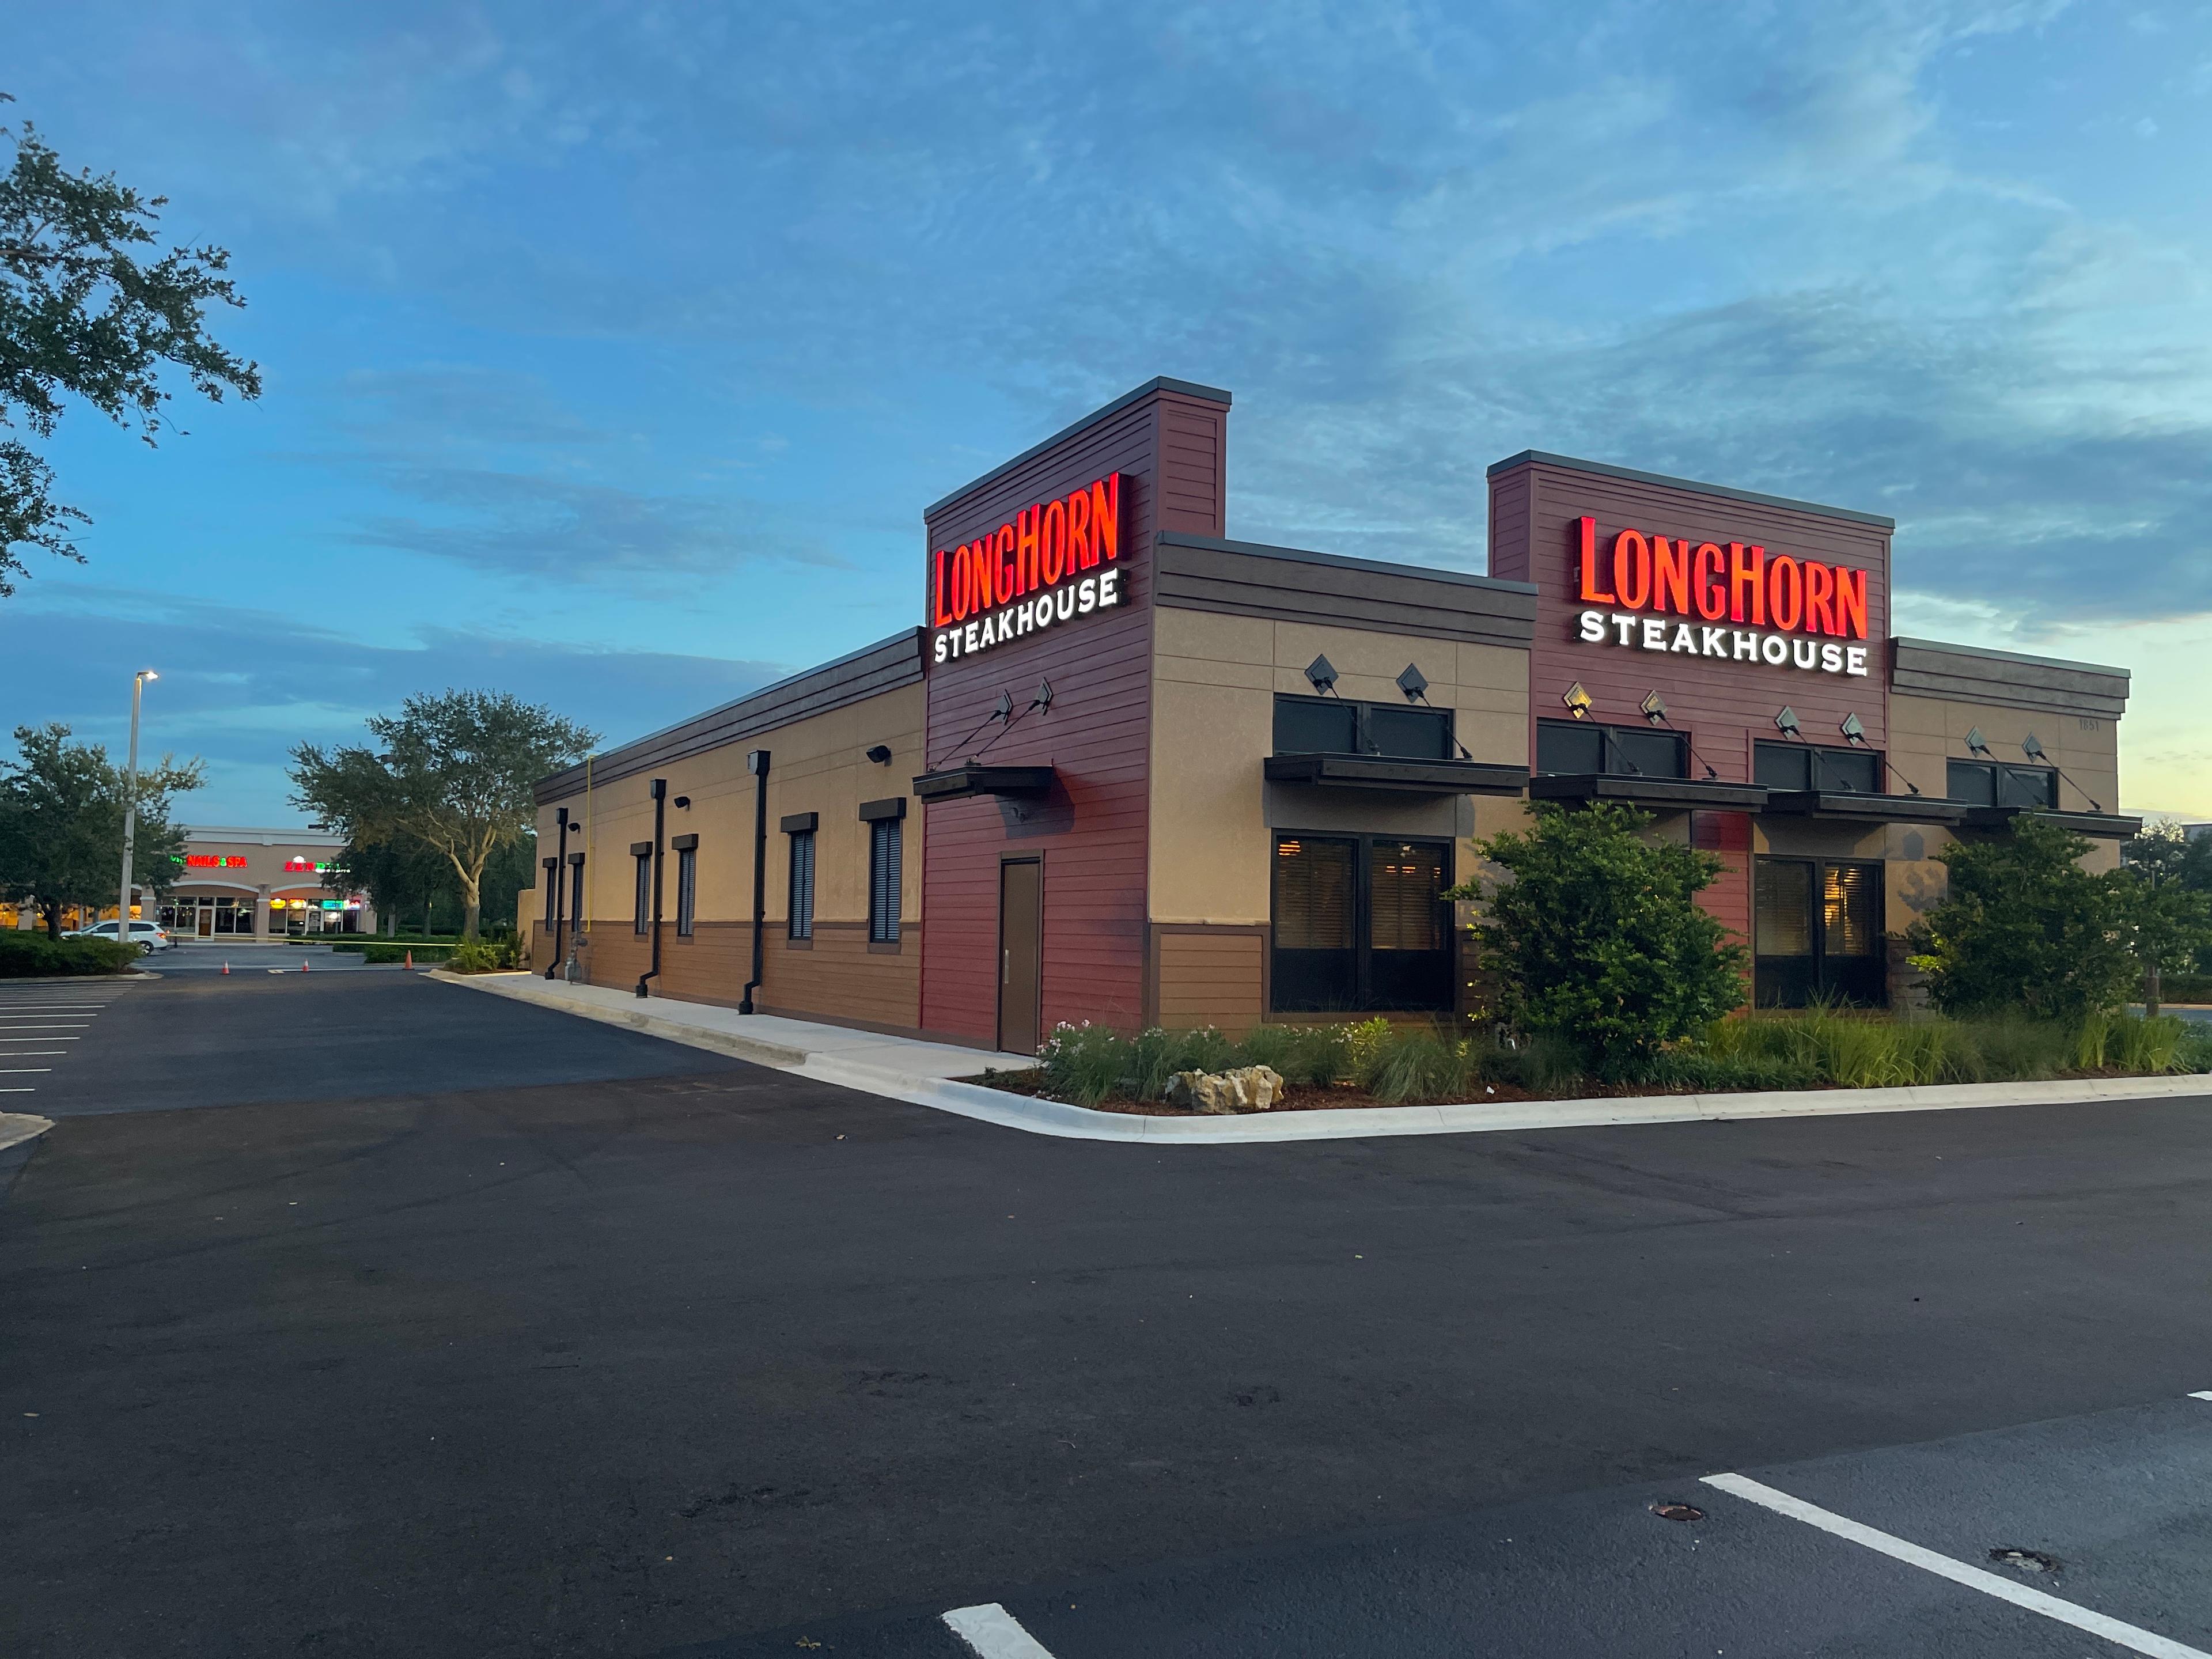 Exterior view of Longhorn Steakhouse in Cape Coral, FL.